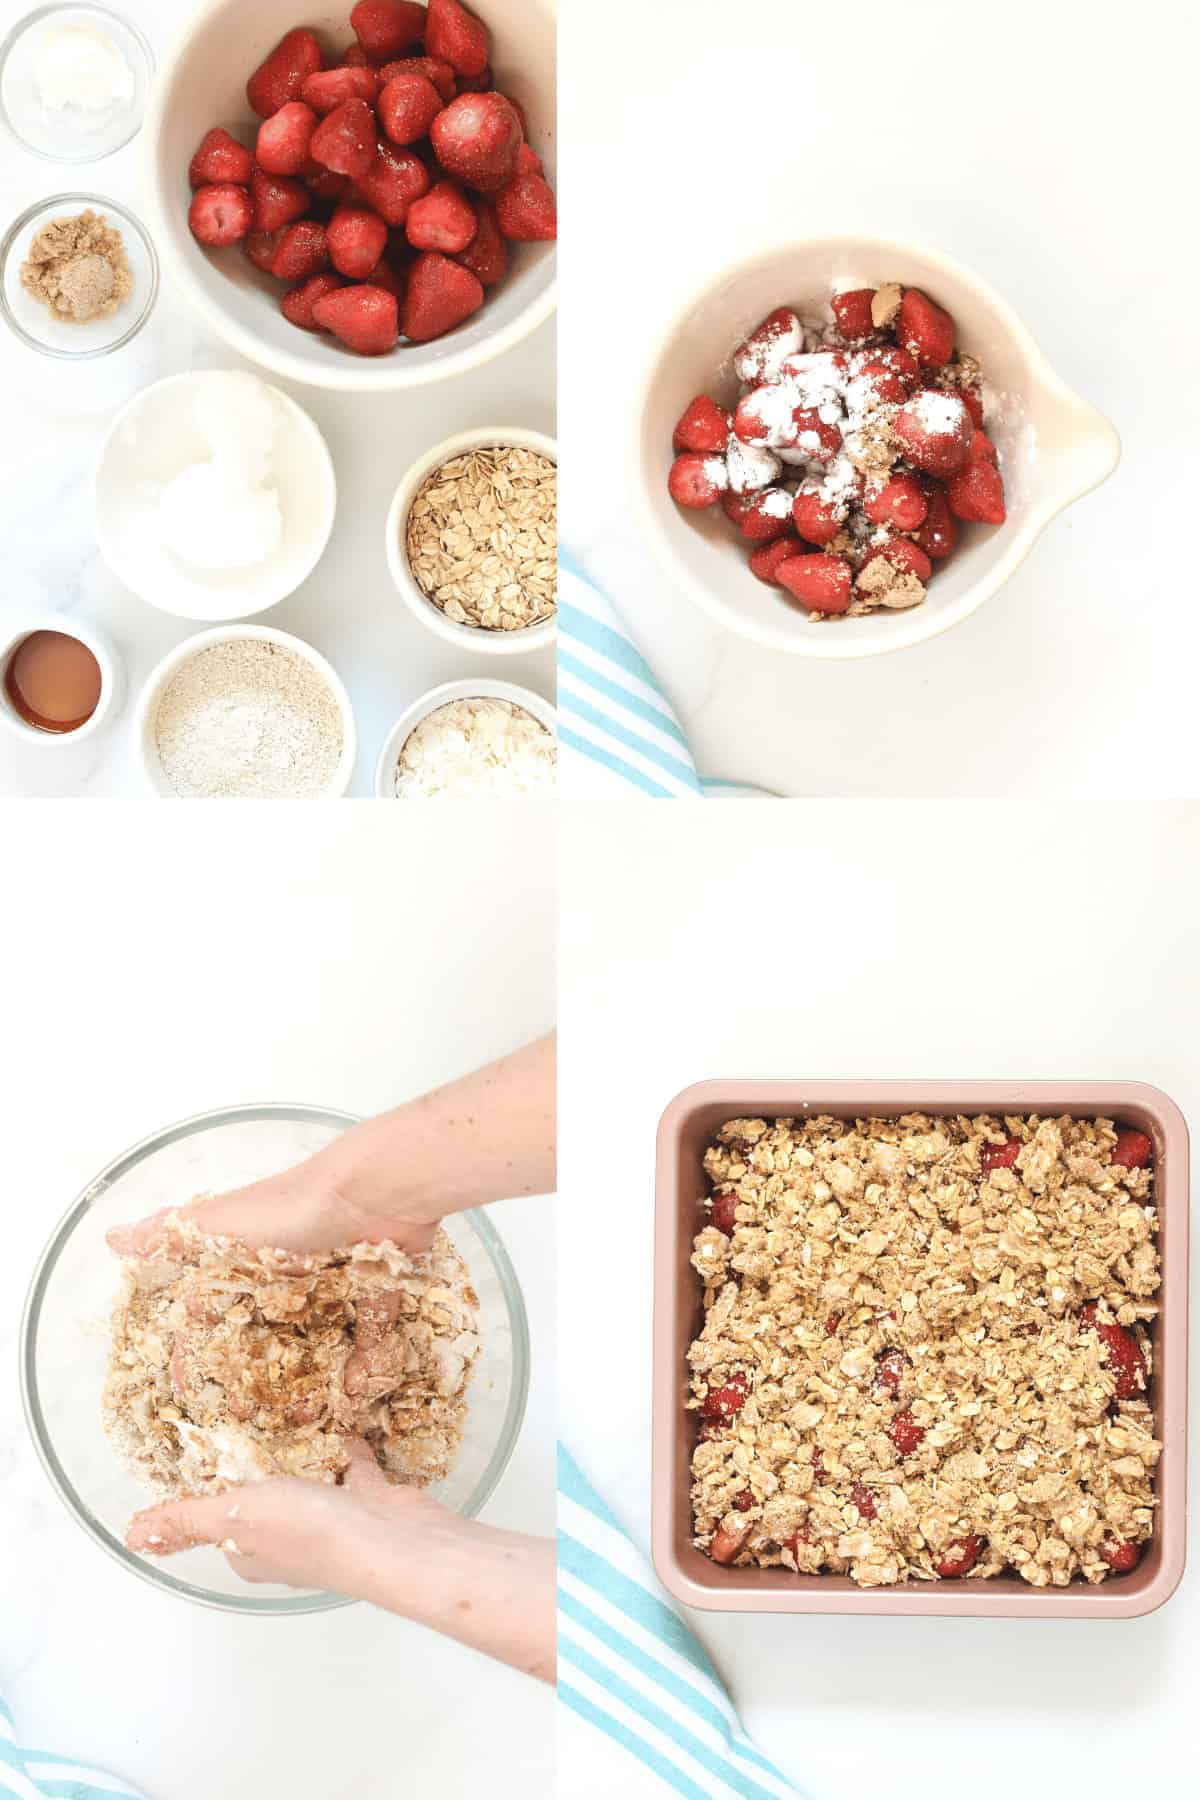 How to make Strawberry Crumble